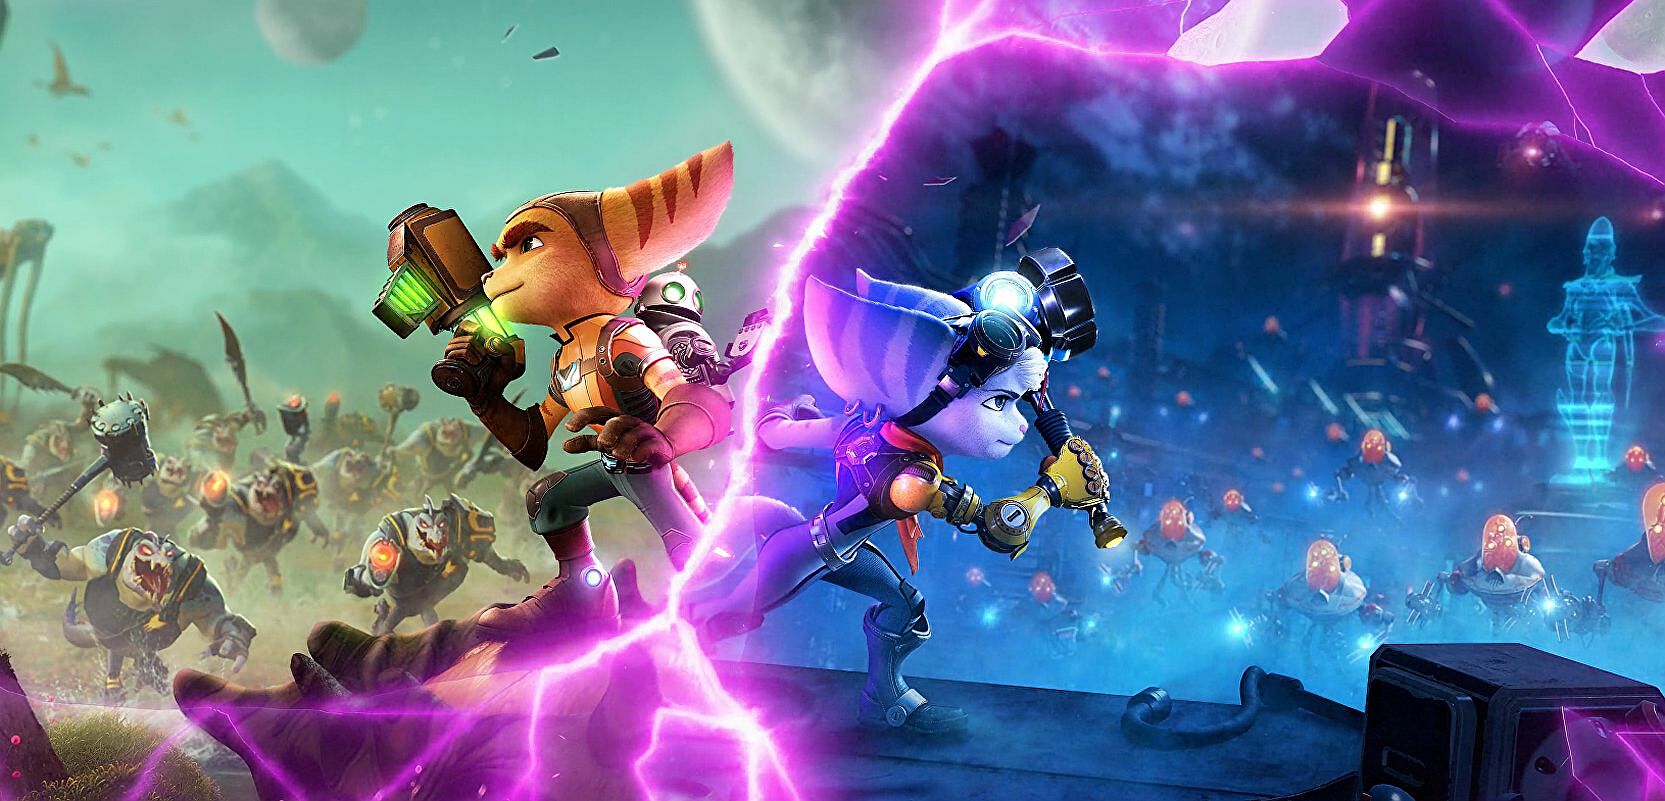 Five Ratchet & Clank games are being added to PlayStation Plus Premium this month